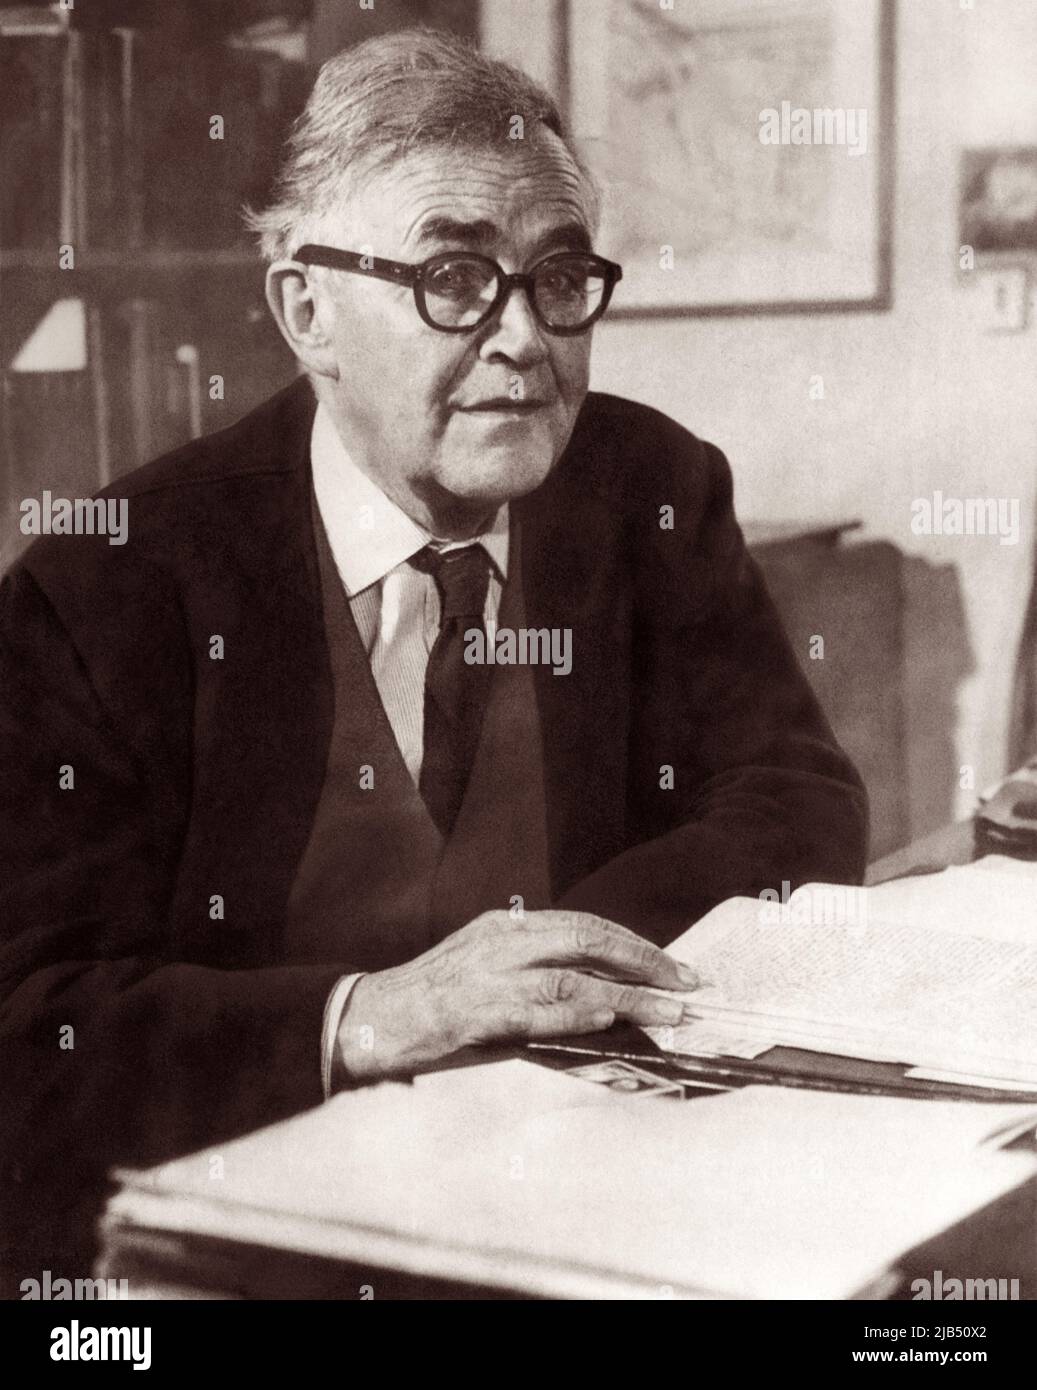 Karl Barth (1886-1968), Swiss Calvinist theologian known for his commentary The Epistle to the Romans, his involvement in the Confessing Church, his authorship of the Barmen Declaration, and his unfinished multi-volume theological summa, Church Dogmatics. Stock Photo